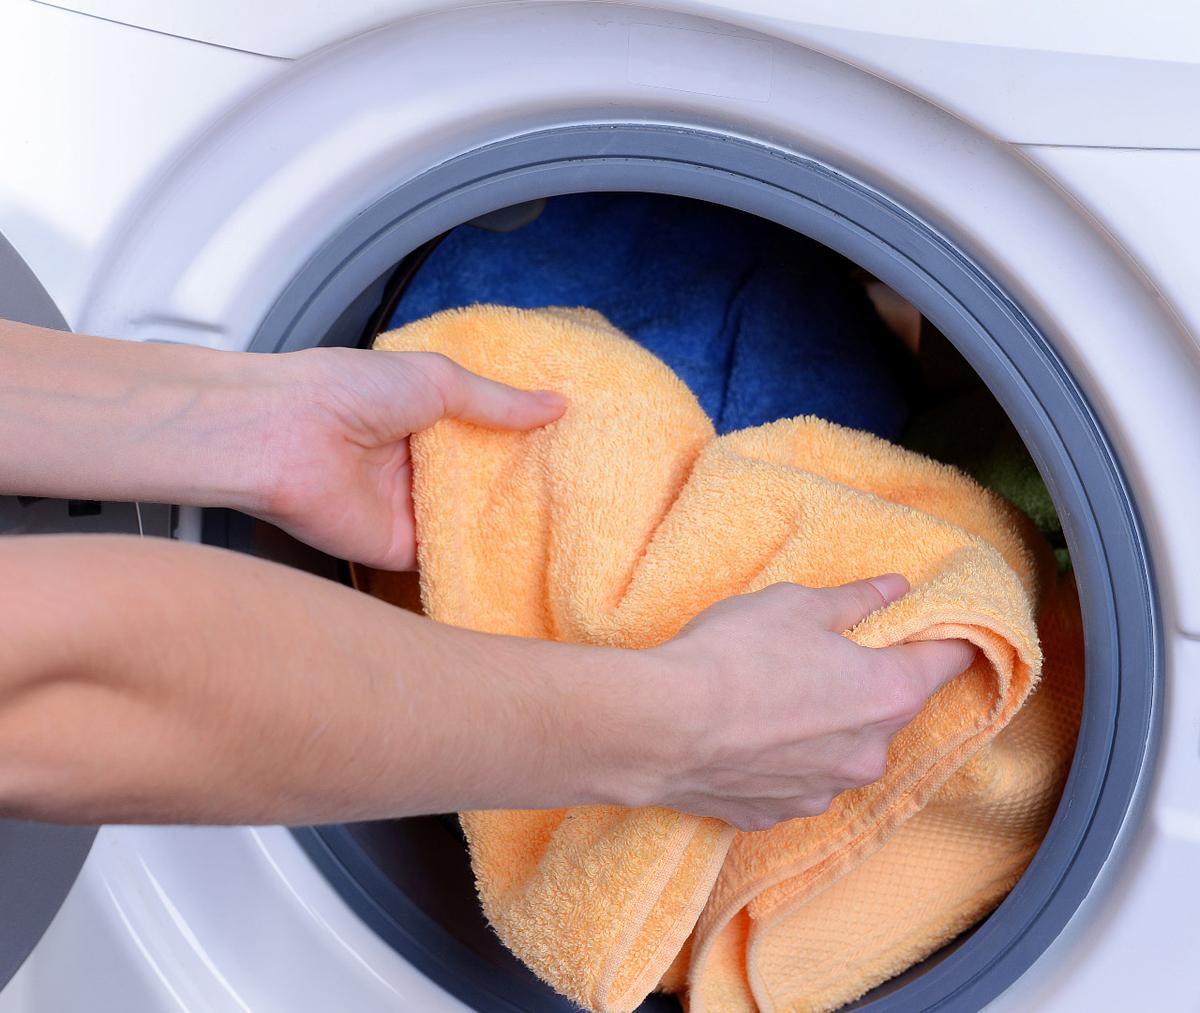 Towel dry cleaning